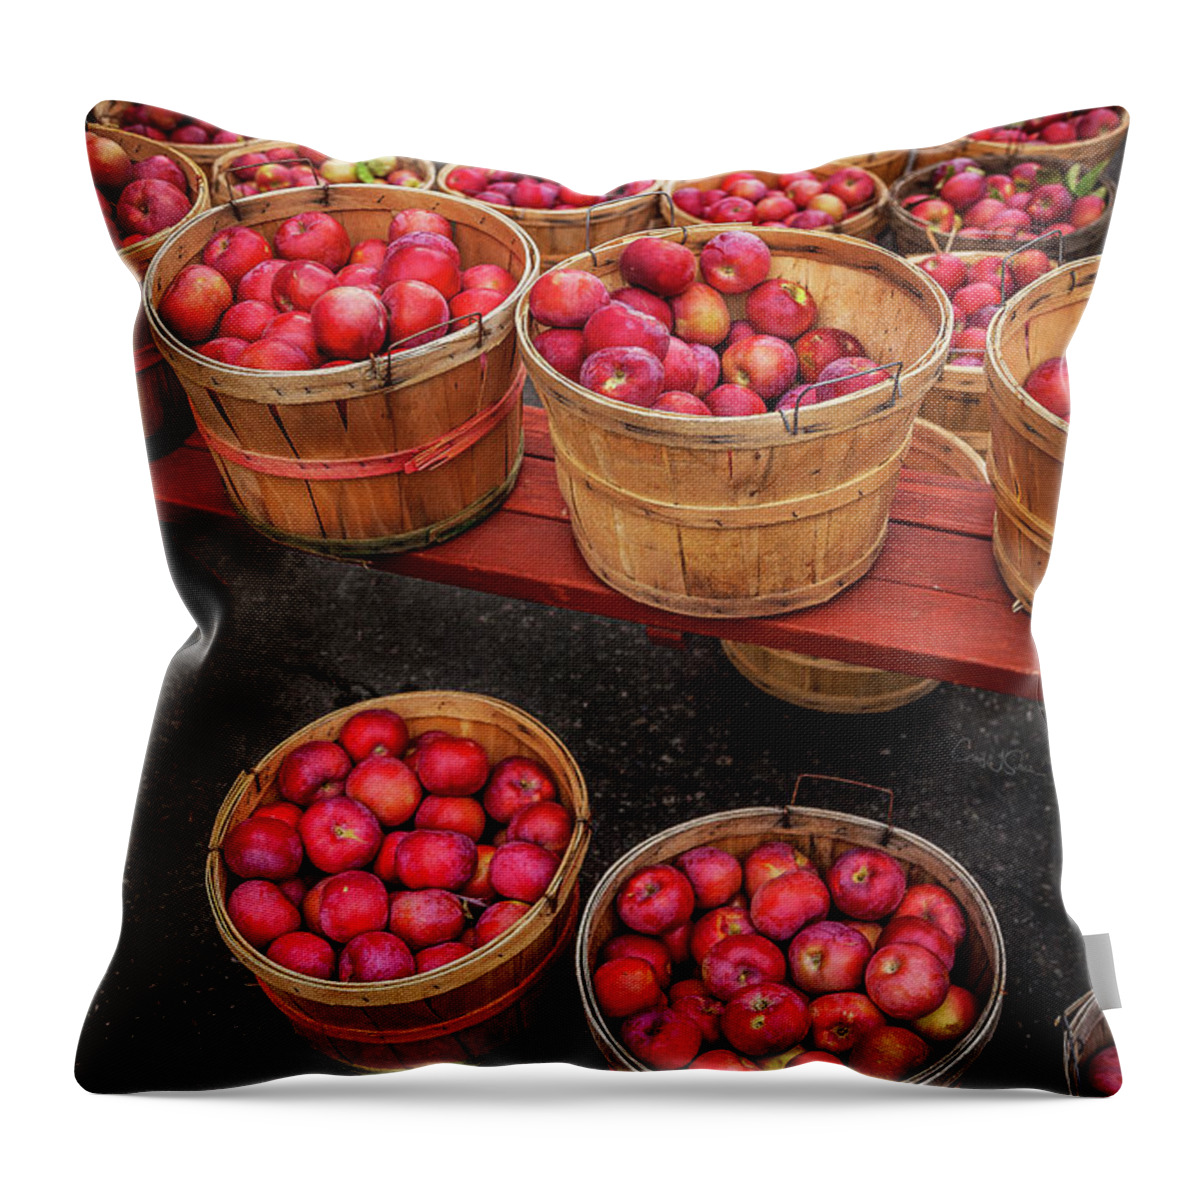 Farmers Market Throw Pillow featuring the photograph Apple Baskets by Craig J Satterlee